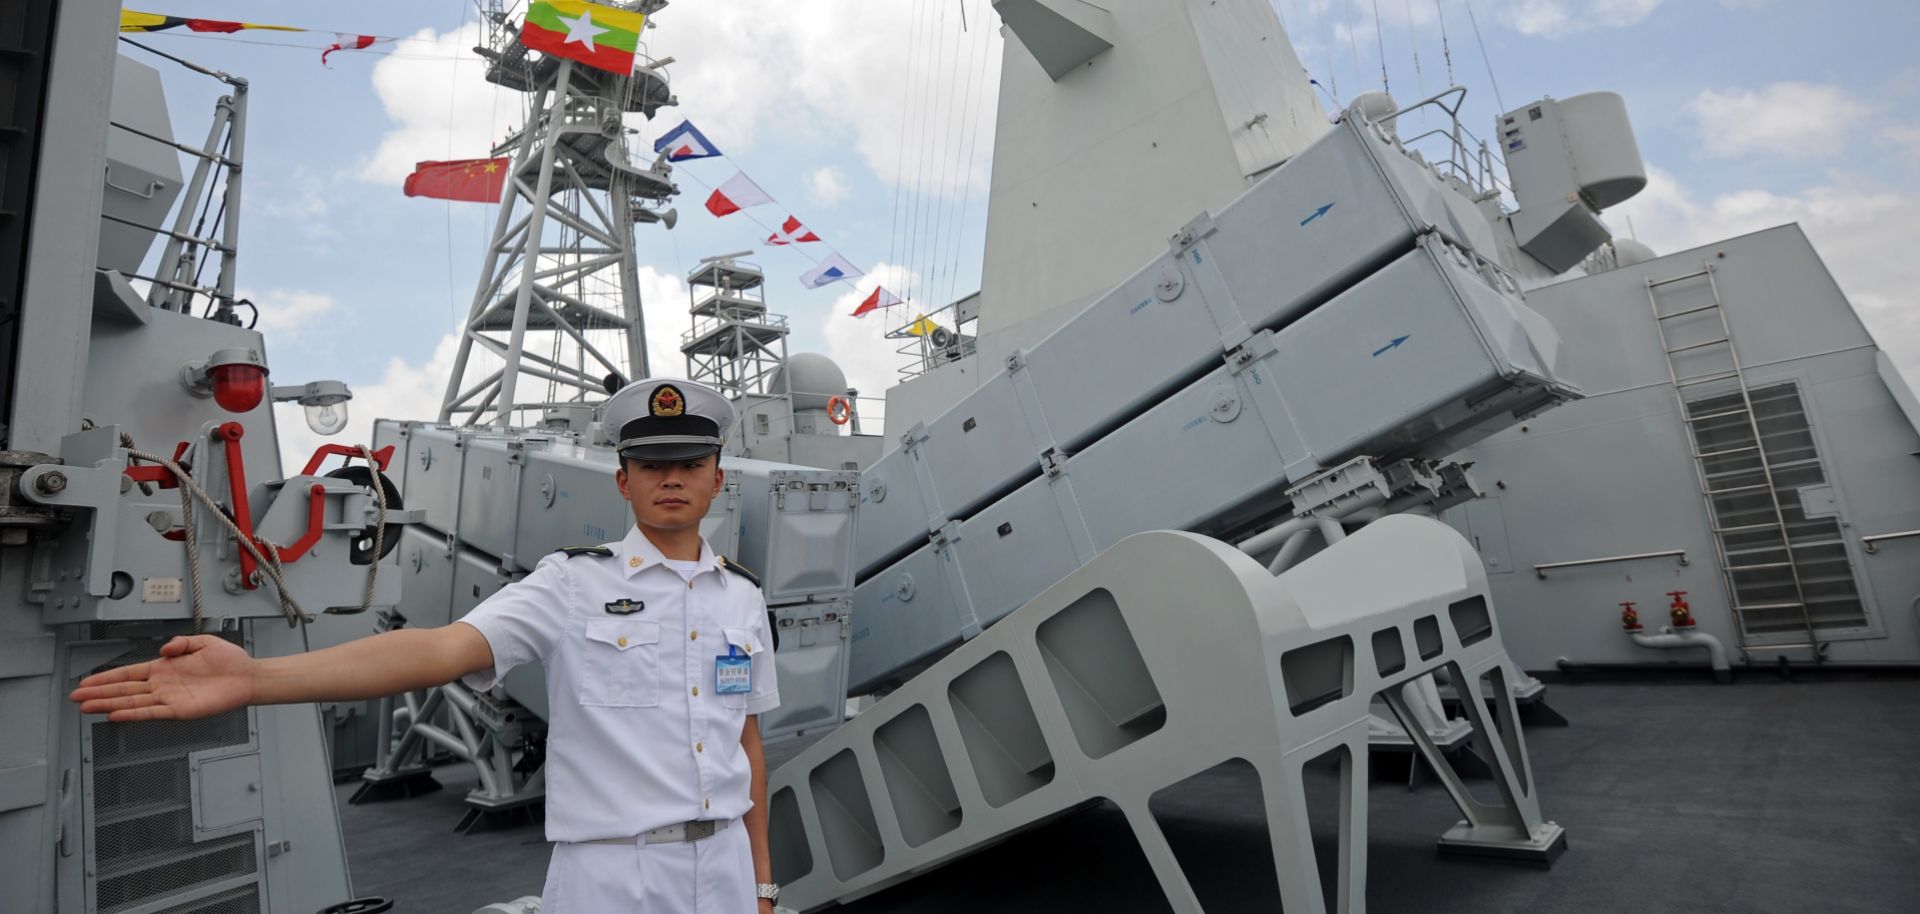 A crew member stands guard on the deck of the Chinese People's Liberation Army Navy ship Wei Fang, docked at the Myanmar International Terminal Thilawa port on the outskirts of Yangon on May 23.